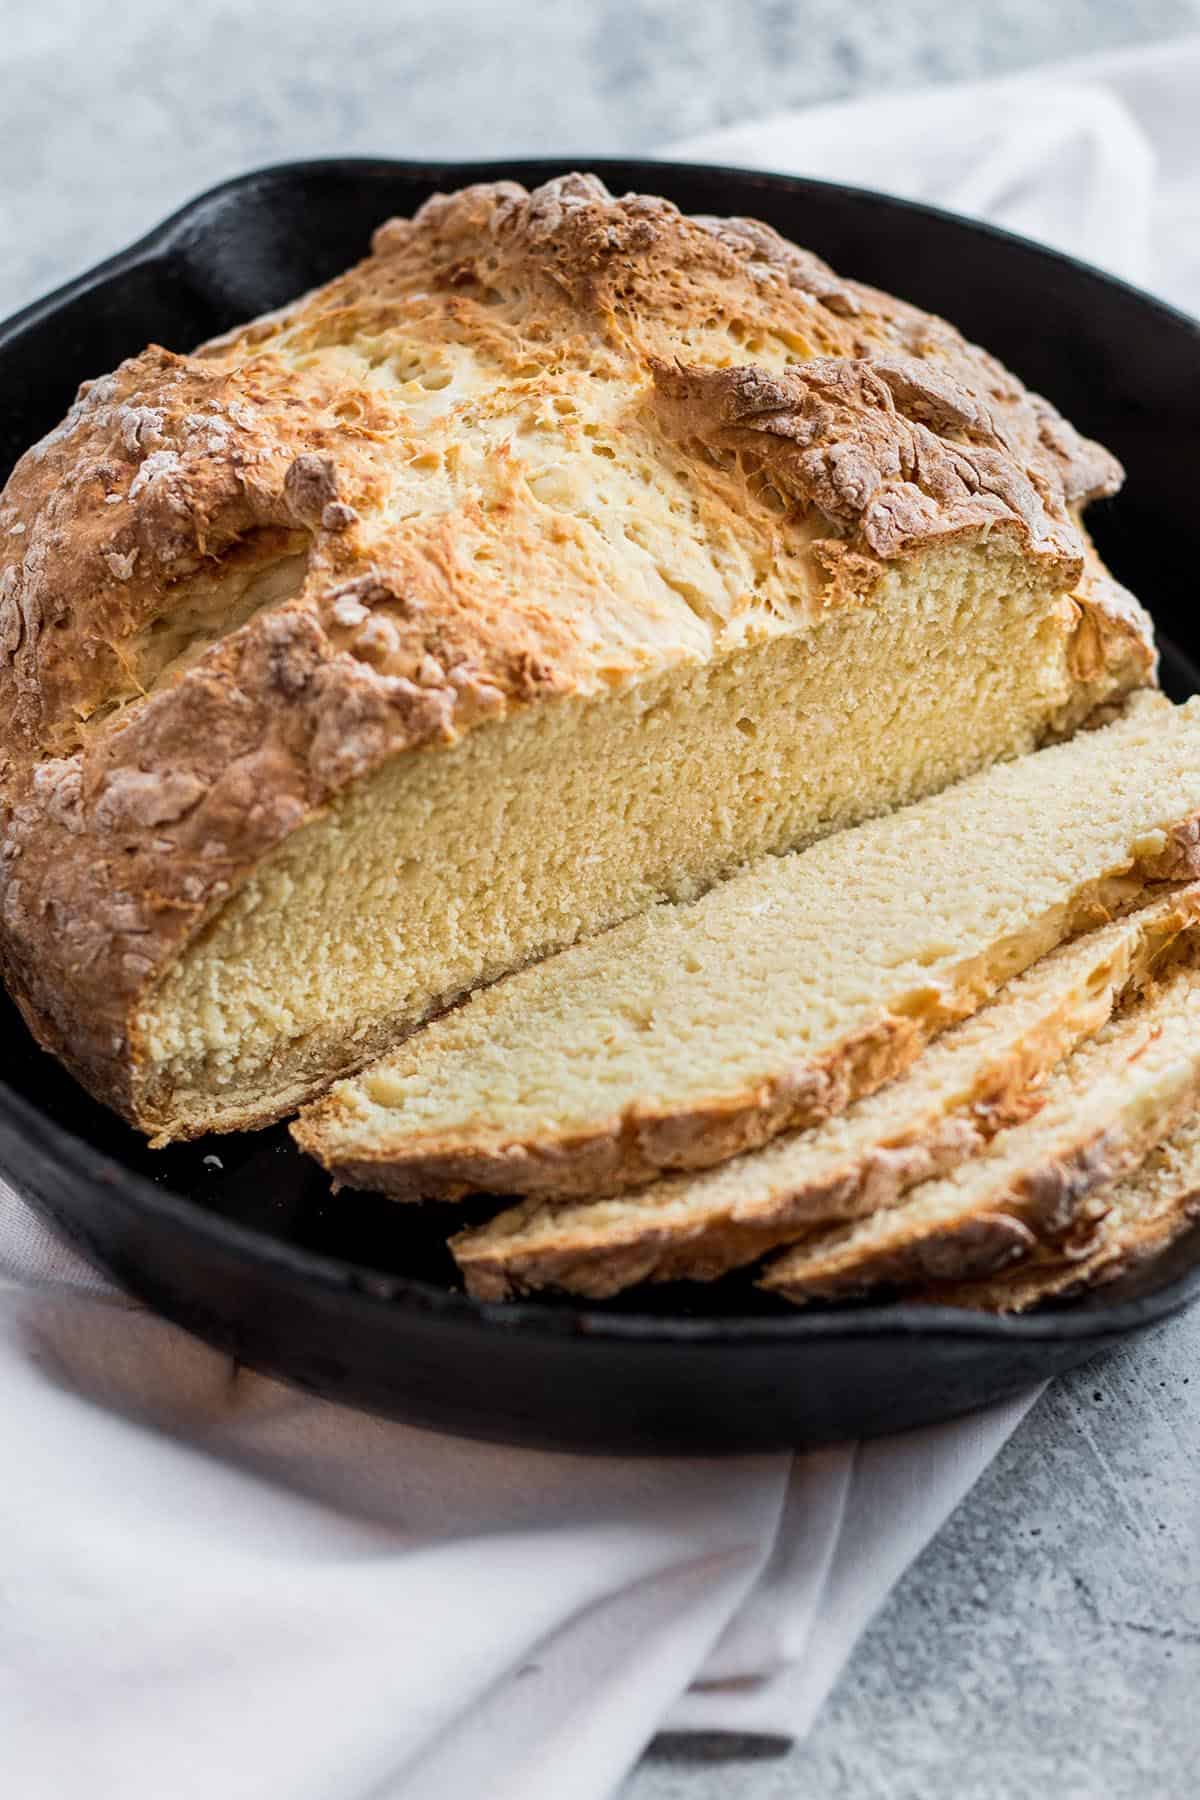 A fresh loaf of Irish Soda bread with slices in a cast iron pan.